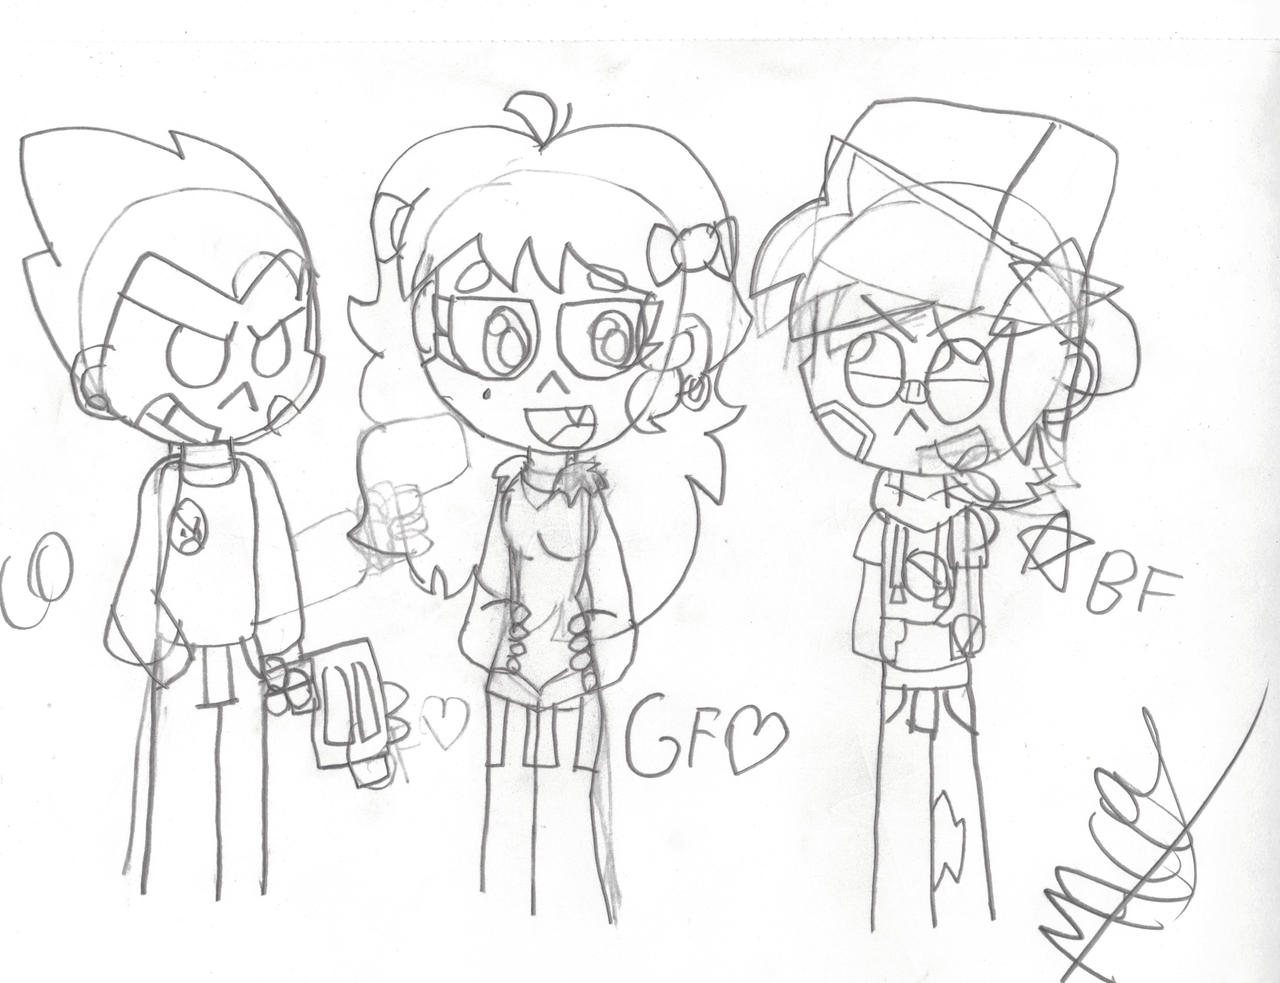 Funkin' in August 01 - BF, GF, and Pico by ElectricSakura16 on DeviantArt